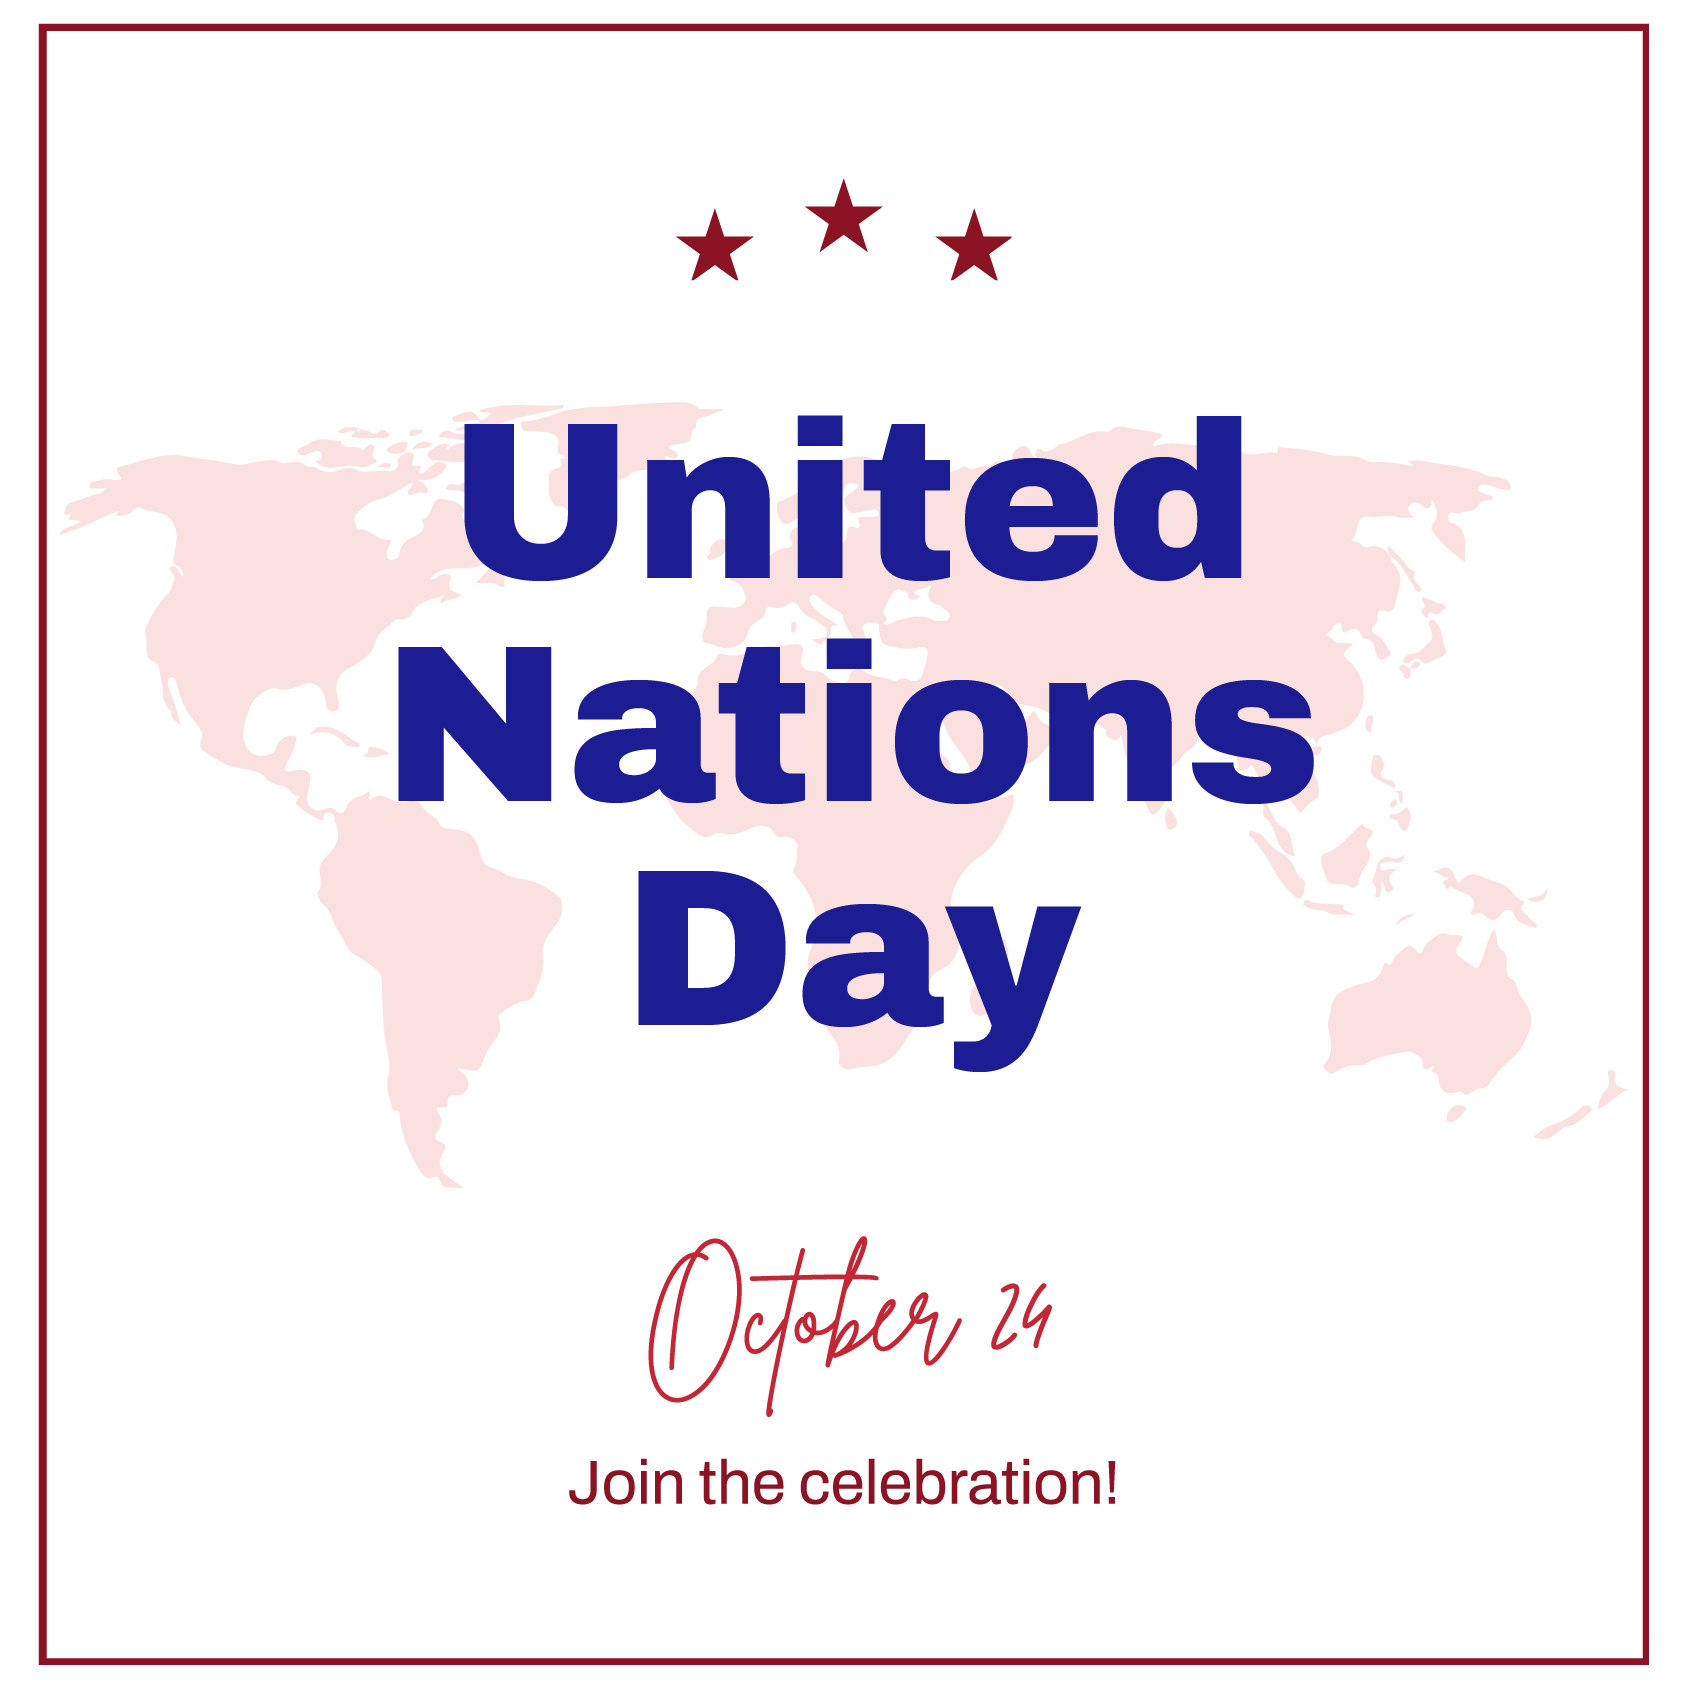 United Nations Day FB Post in Illustrator, PSD, EPS, SVG, JPG, PNG